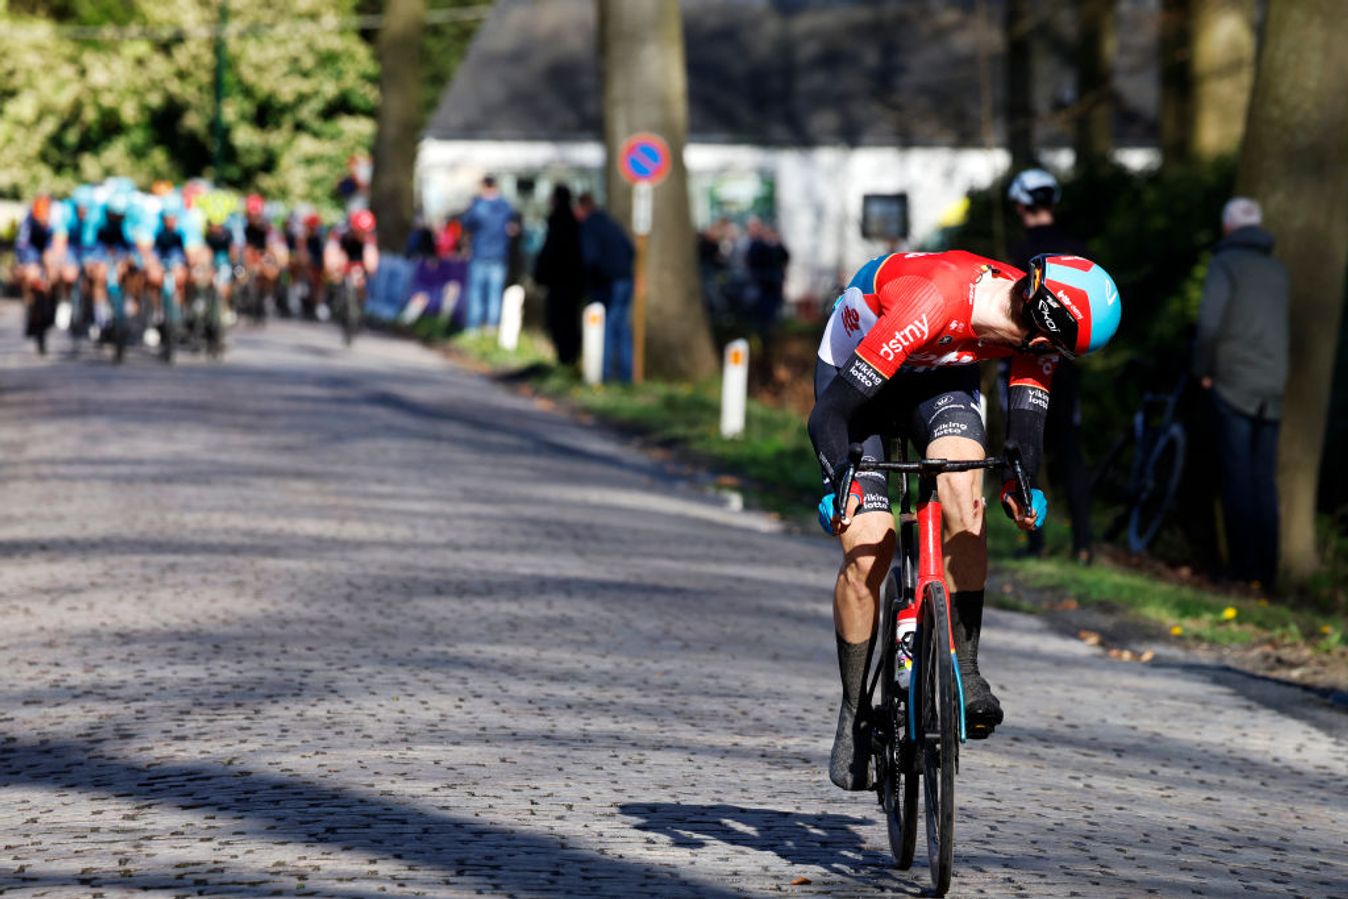 Slock is caught on the cobbles